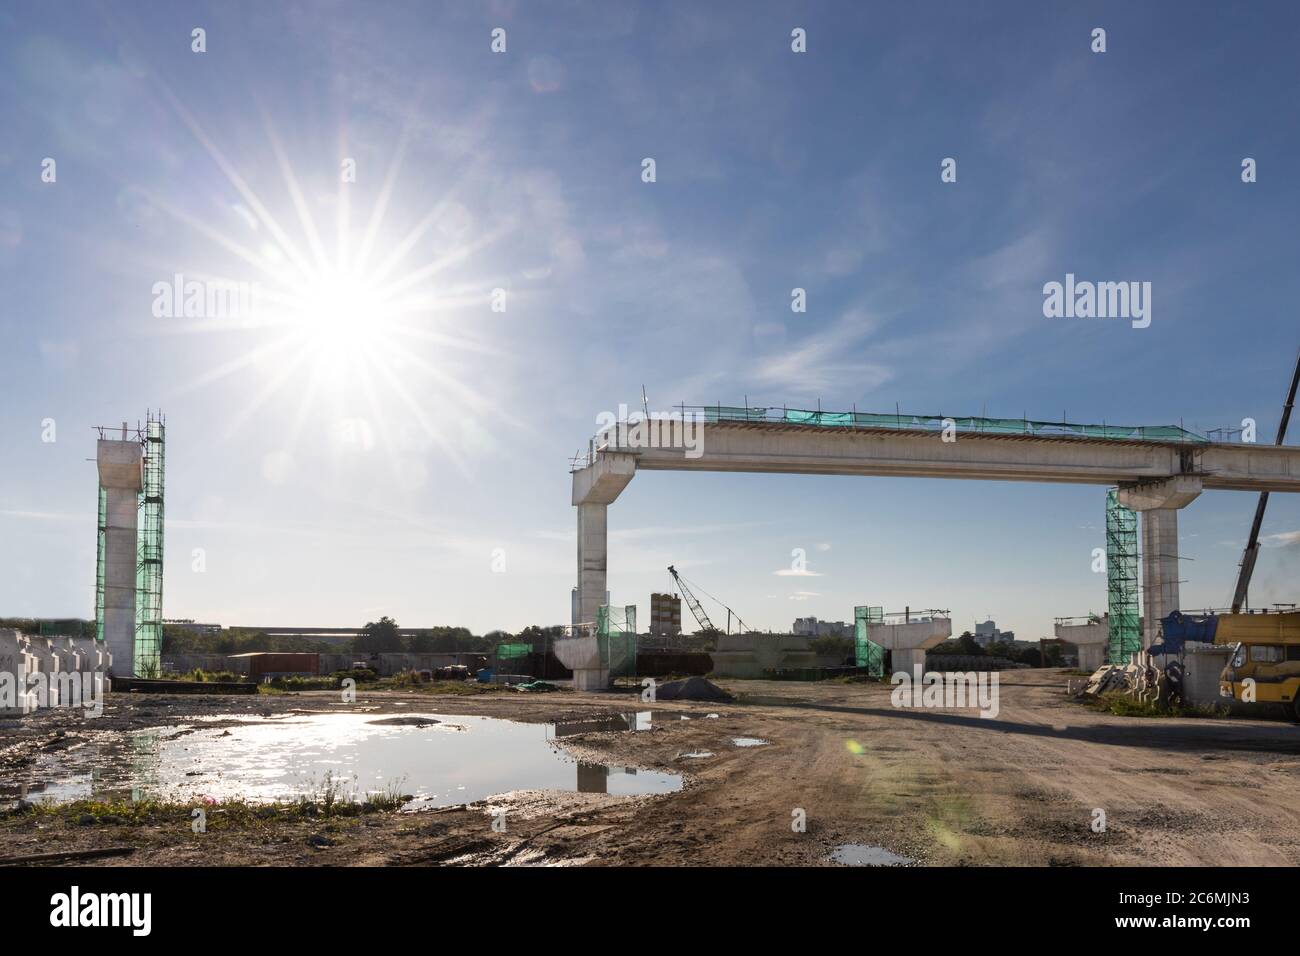 Construction of Mass Rail Transit column infrastructure in progress to improve transportation network, against bright sun ray Stock Photo